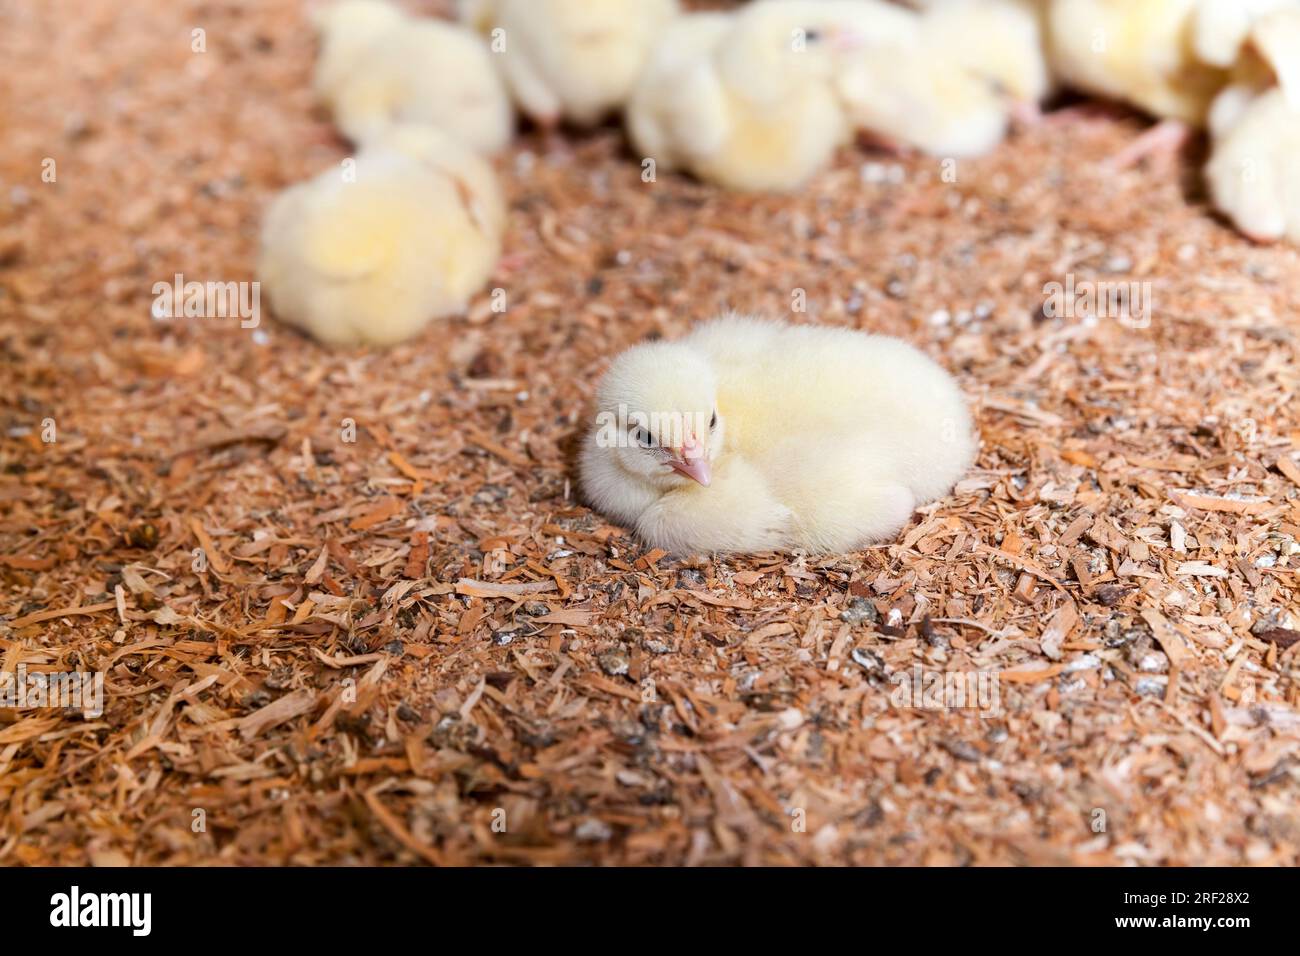 chicken chicks at a poultry farm where broiler chicken is raised for meat and other poultry products, young broiler chickens close up Stock Photo